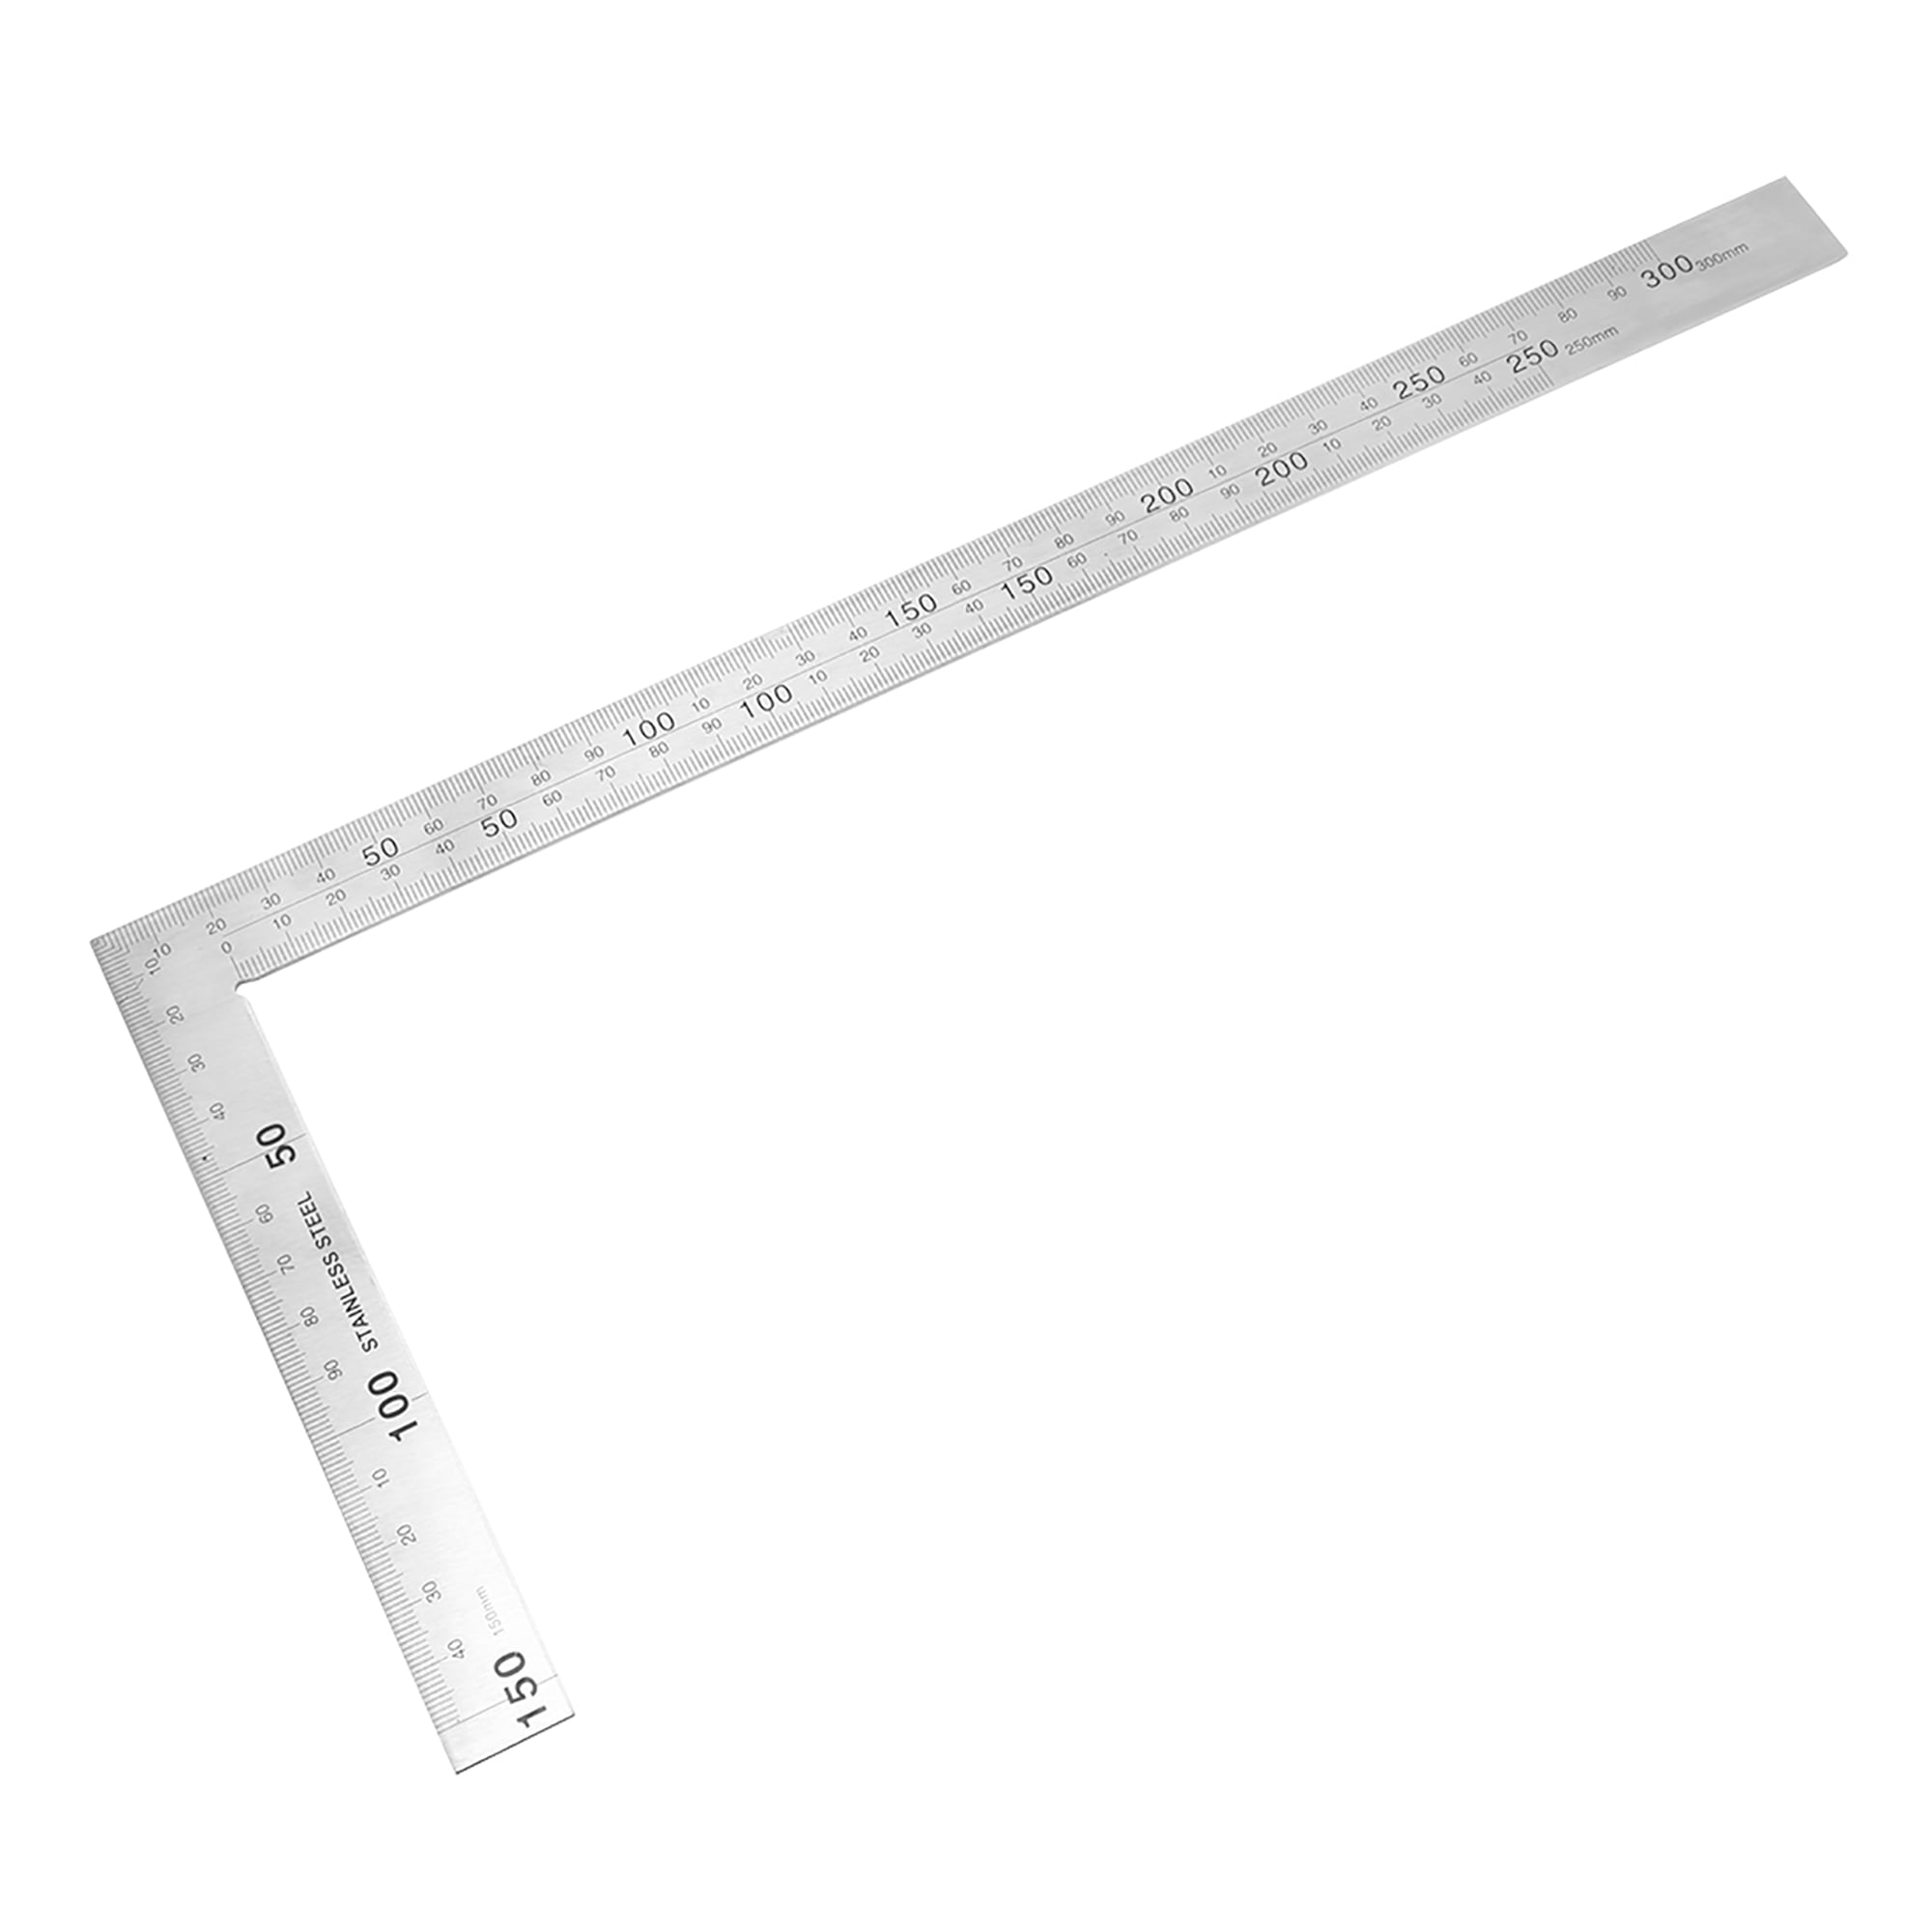 L Shape Square 500mm/18 Inch Aluminum Right Angle Ruler with Level Bubble 